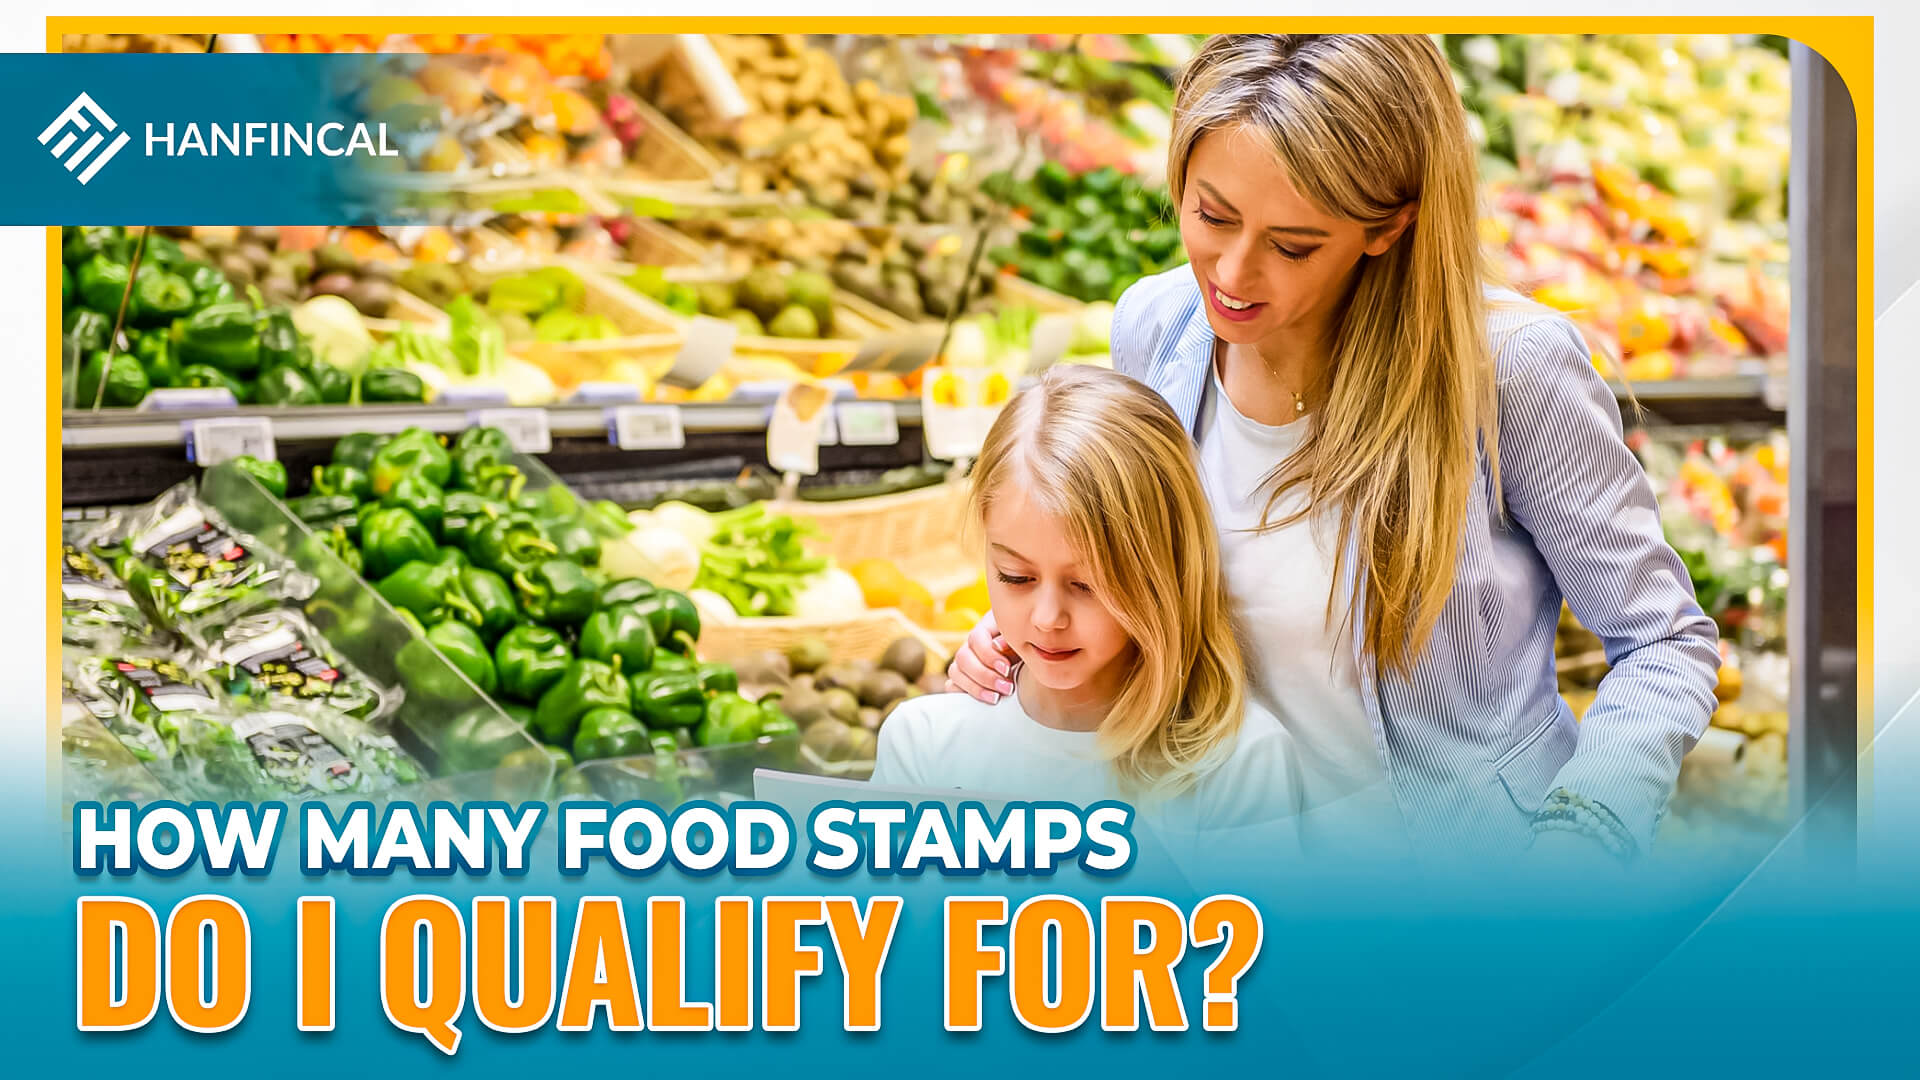 How To Apply For Food Stamps In Pennsylvania?